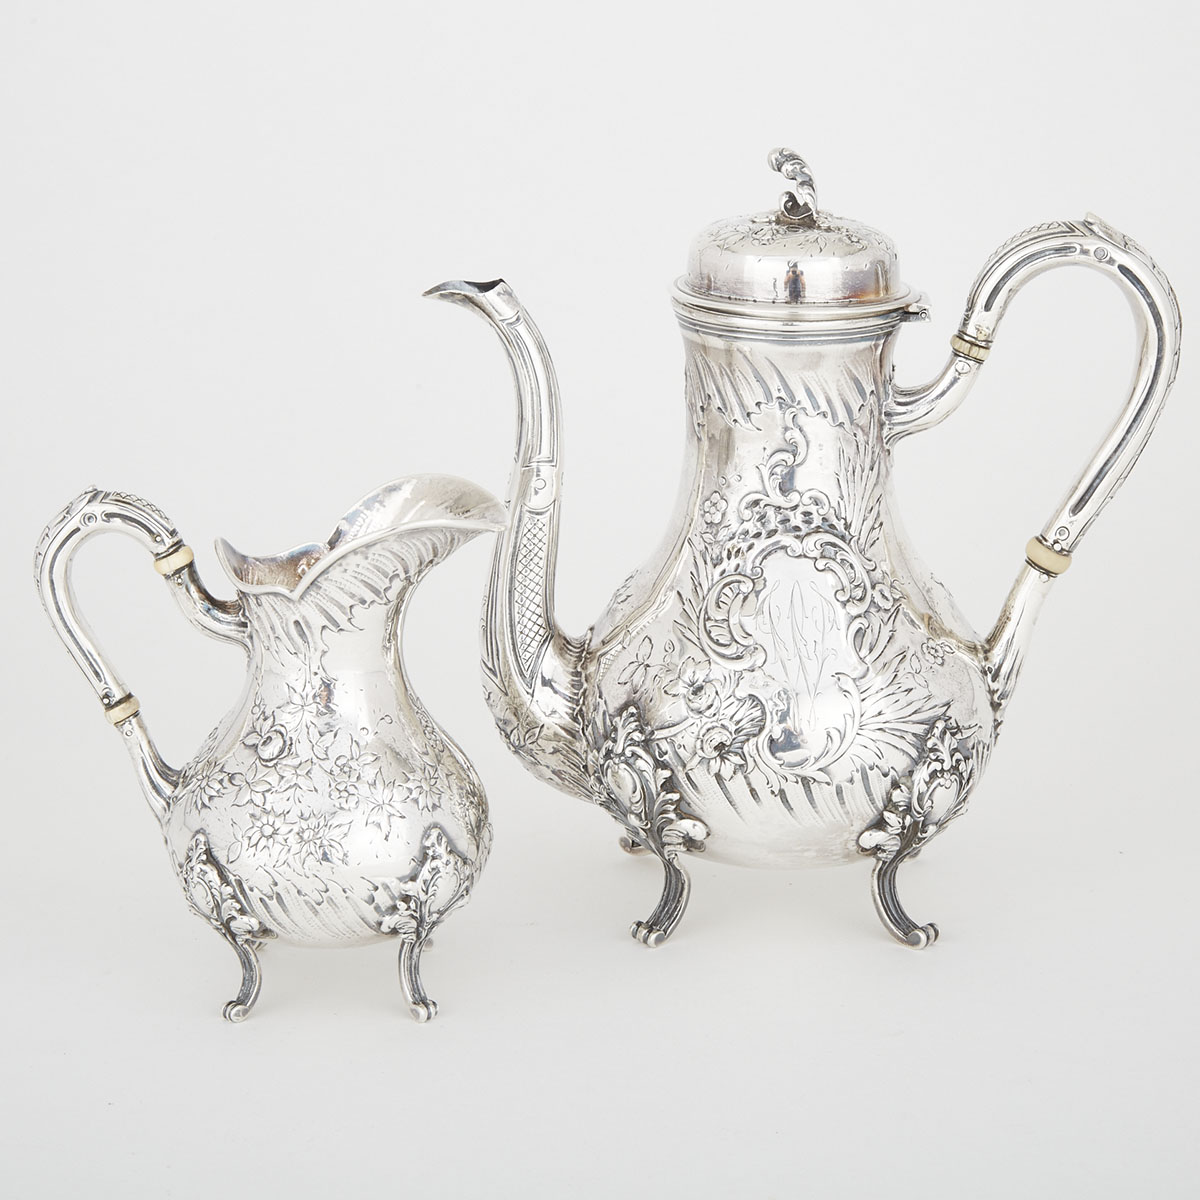 French Silver Coffee Pot and Milk Jug, Paris, late 19th century